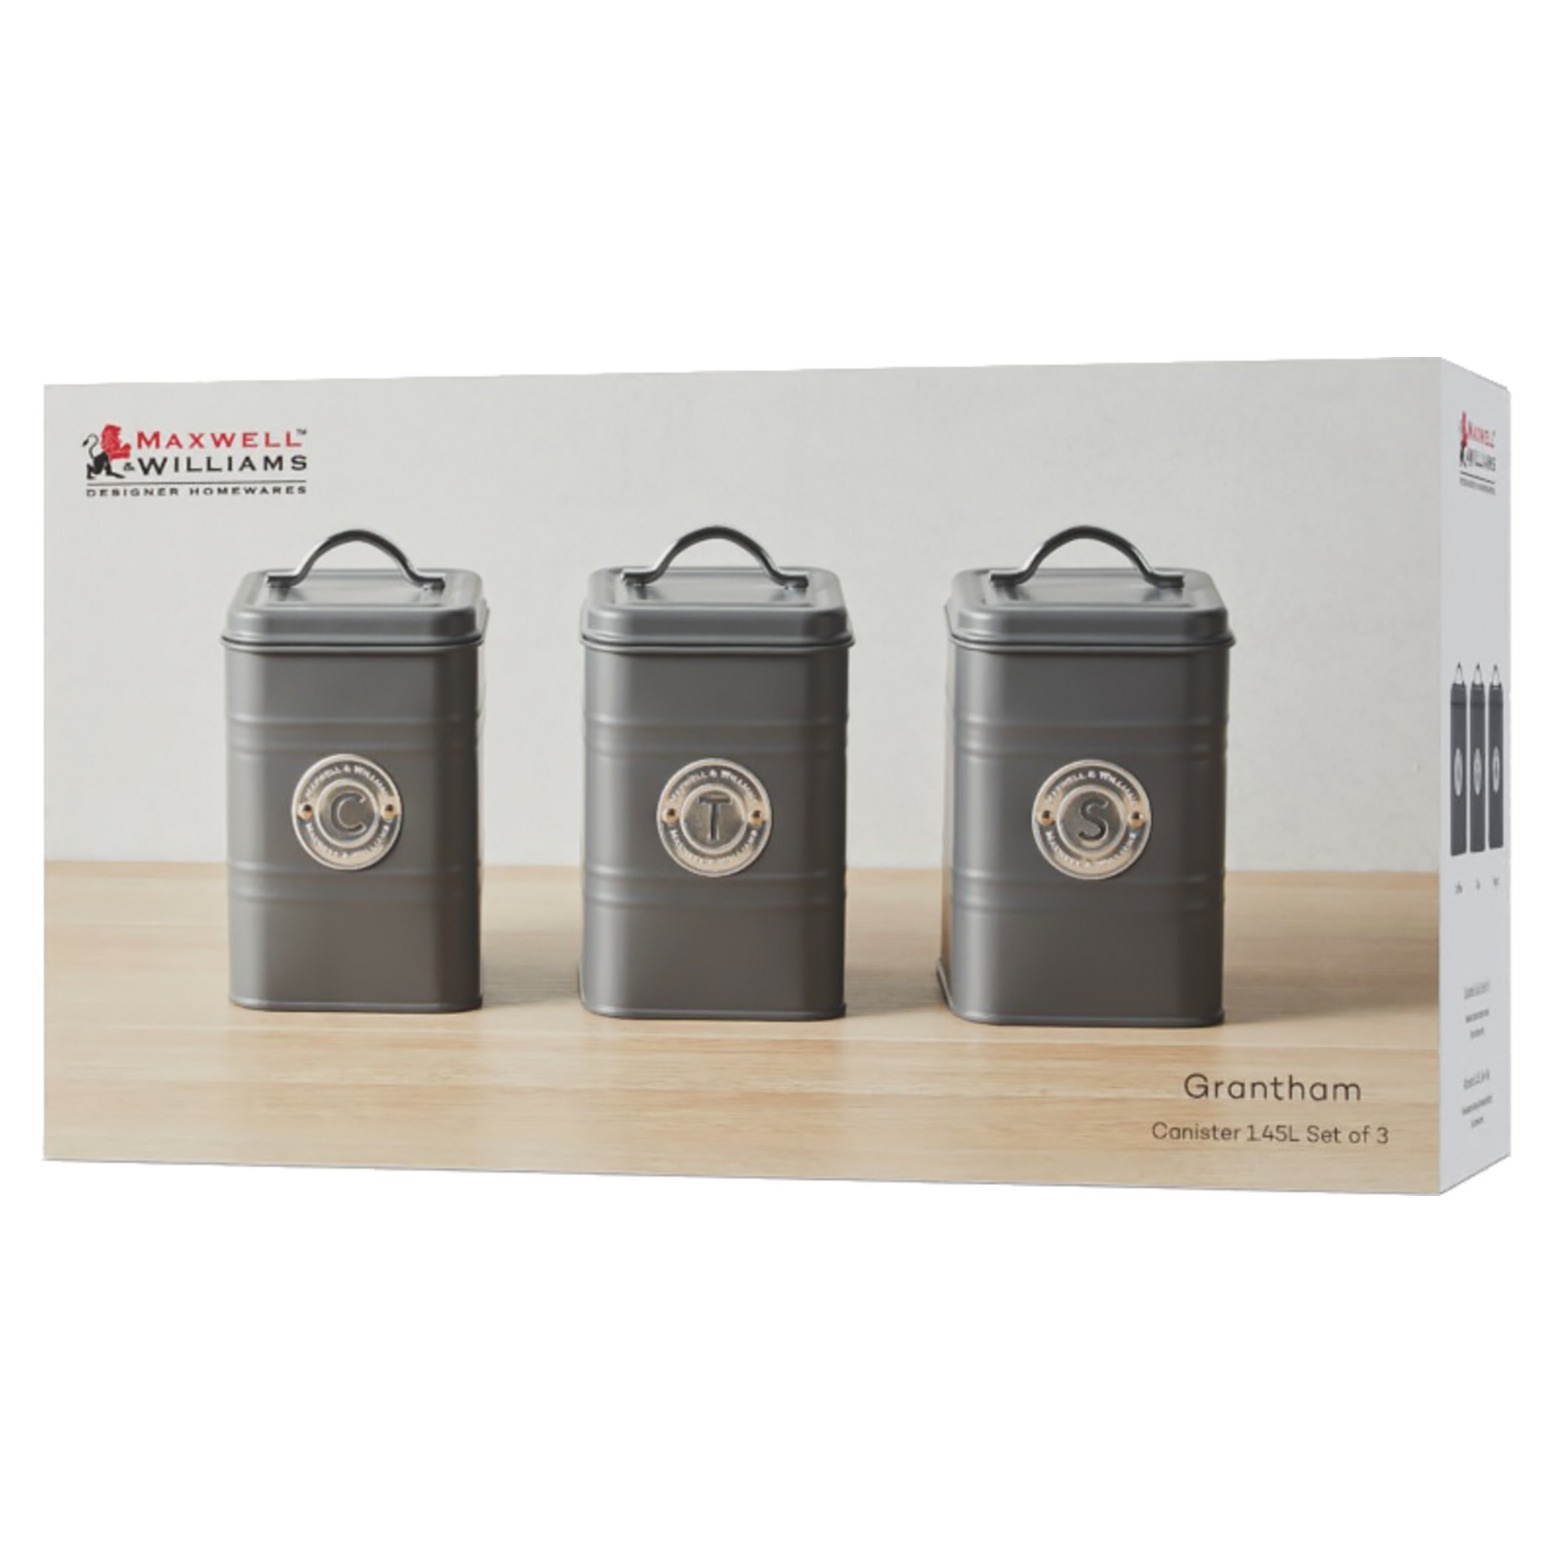 Maxwell & Williams Grantham Canister Set of 3 Charcoal Gift Boxed